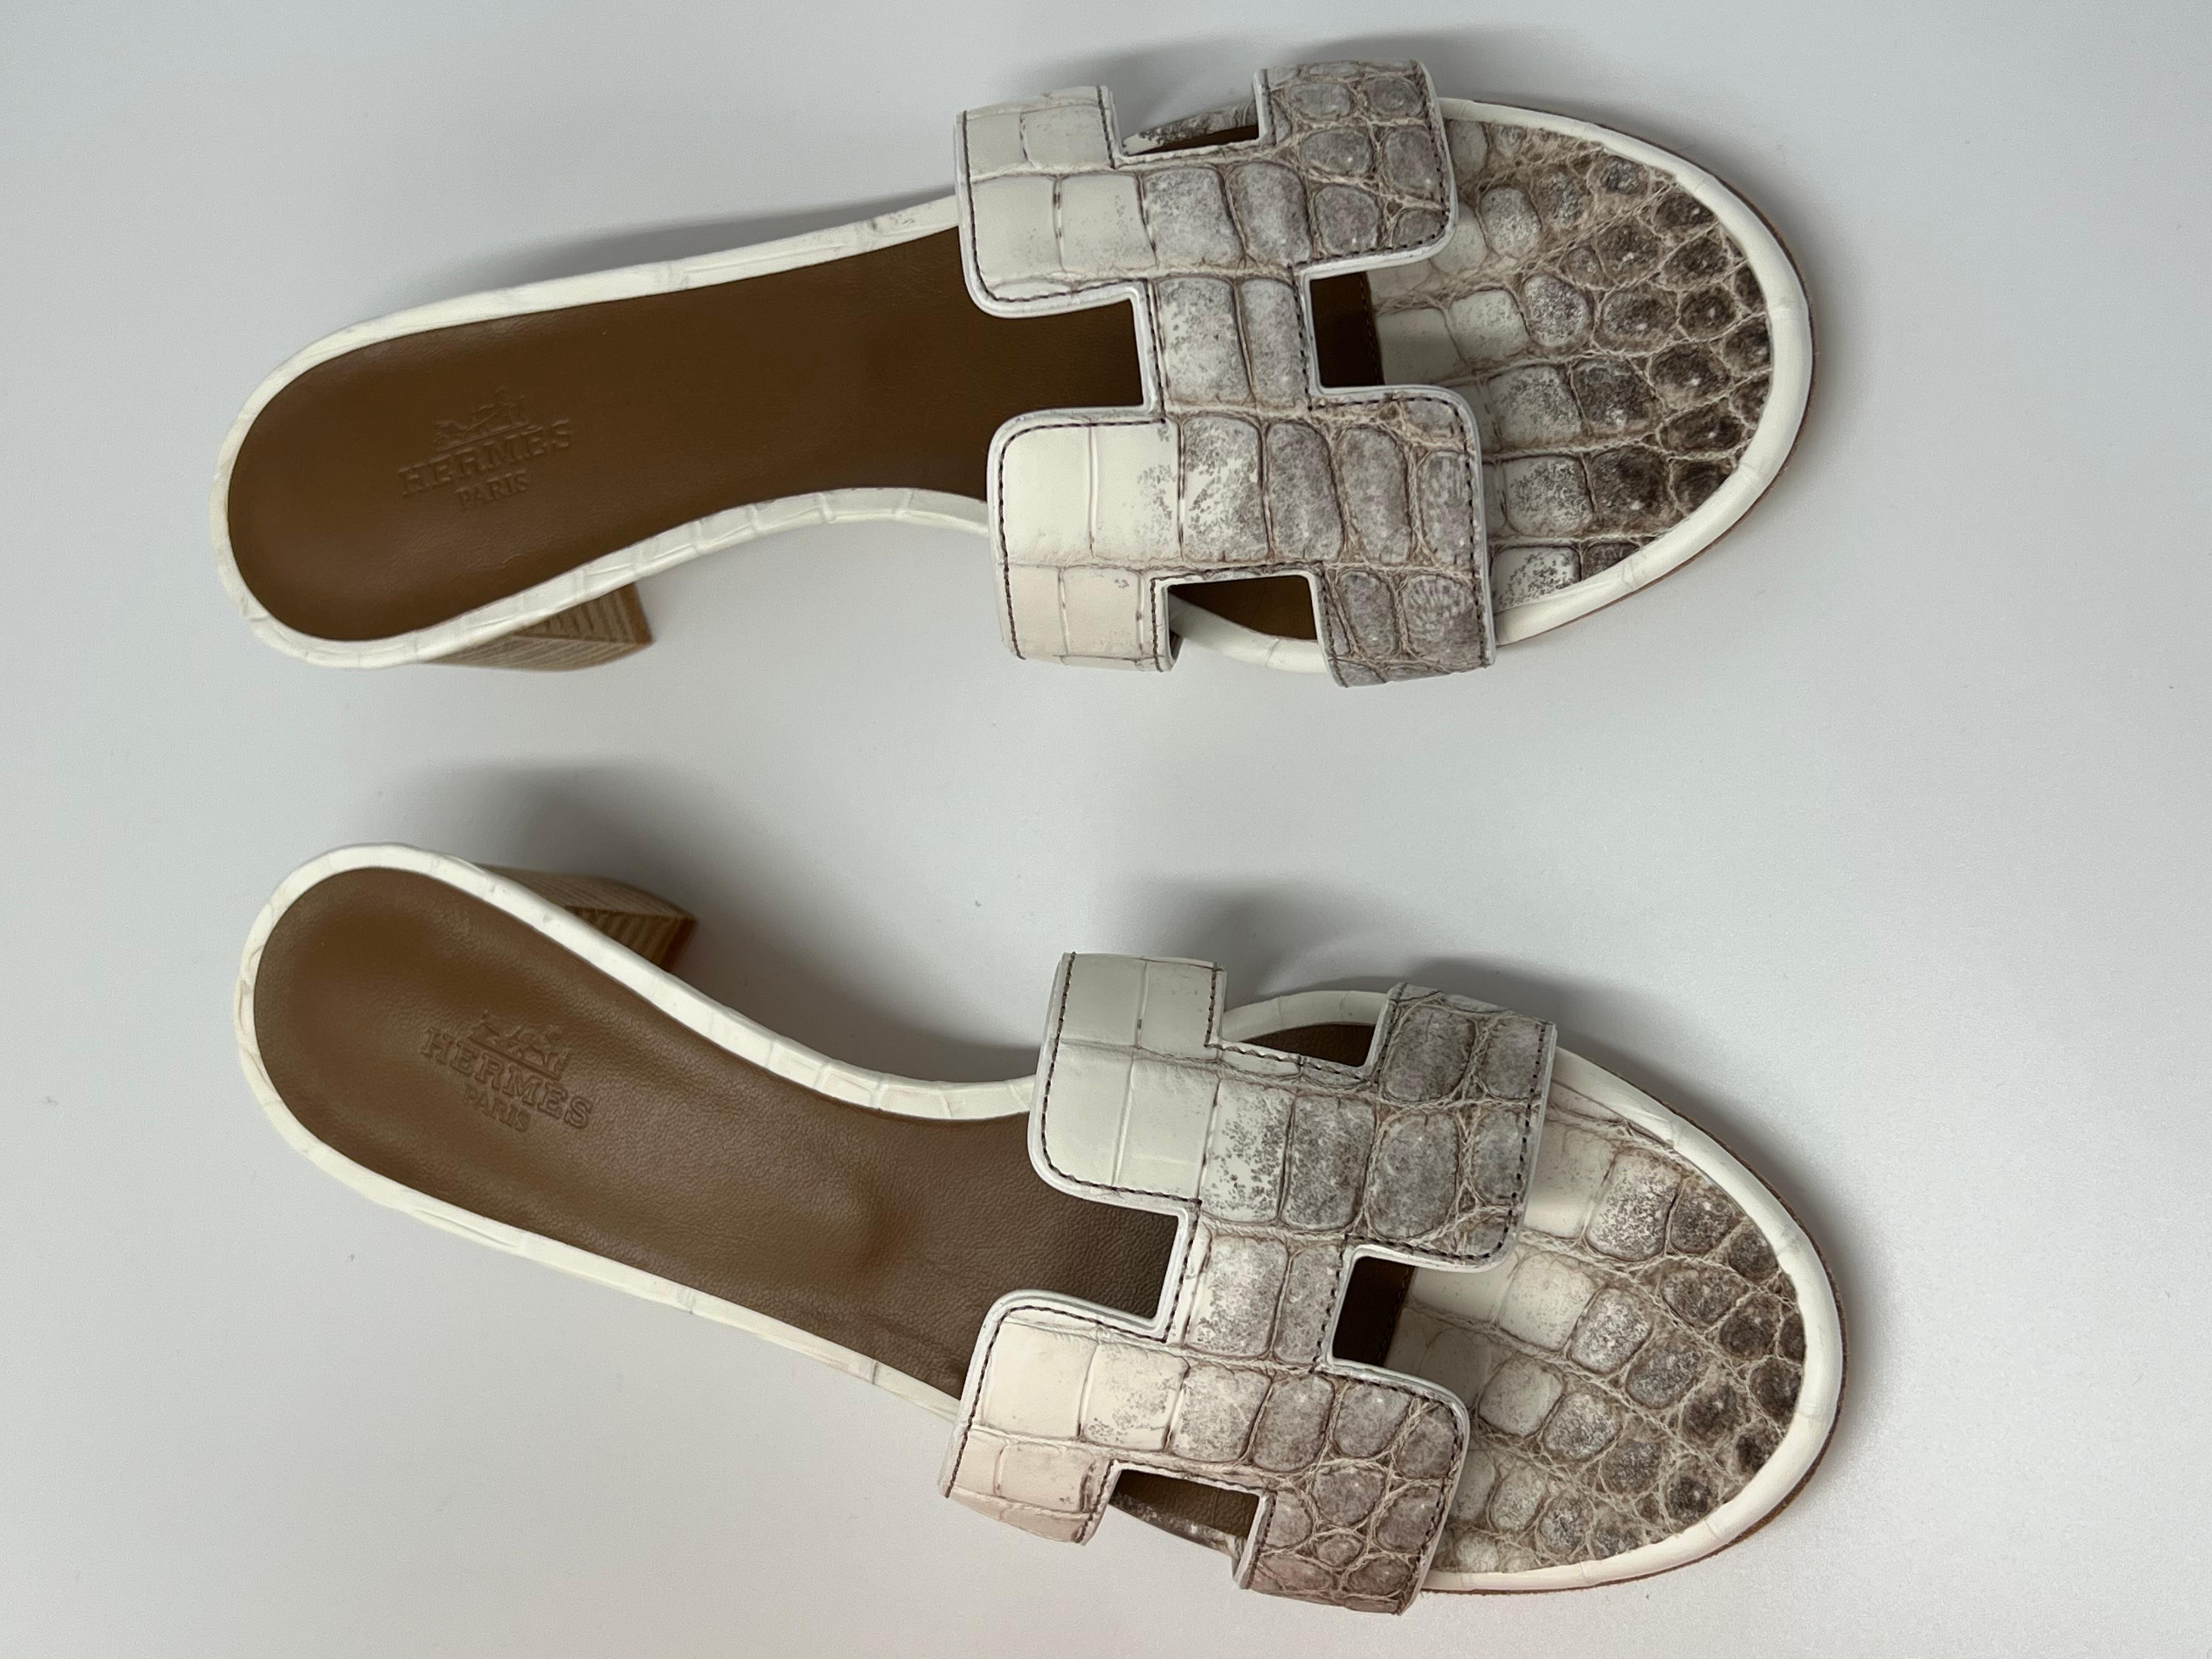 Includes invoice, box, dustbag and Cites
Made in France
Brand New Himalayan Crocodile Oran Sandals full set with CITES
These beautifully crafted sandals are crafted to mimic the snowy peaks of the Himalayan mountains.
 Hermes collectors item.
 Size